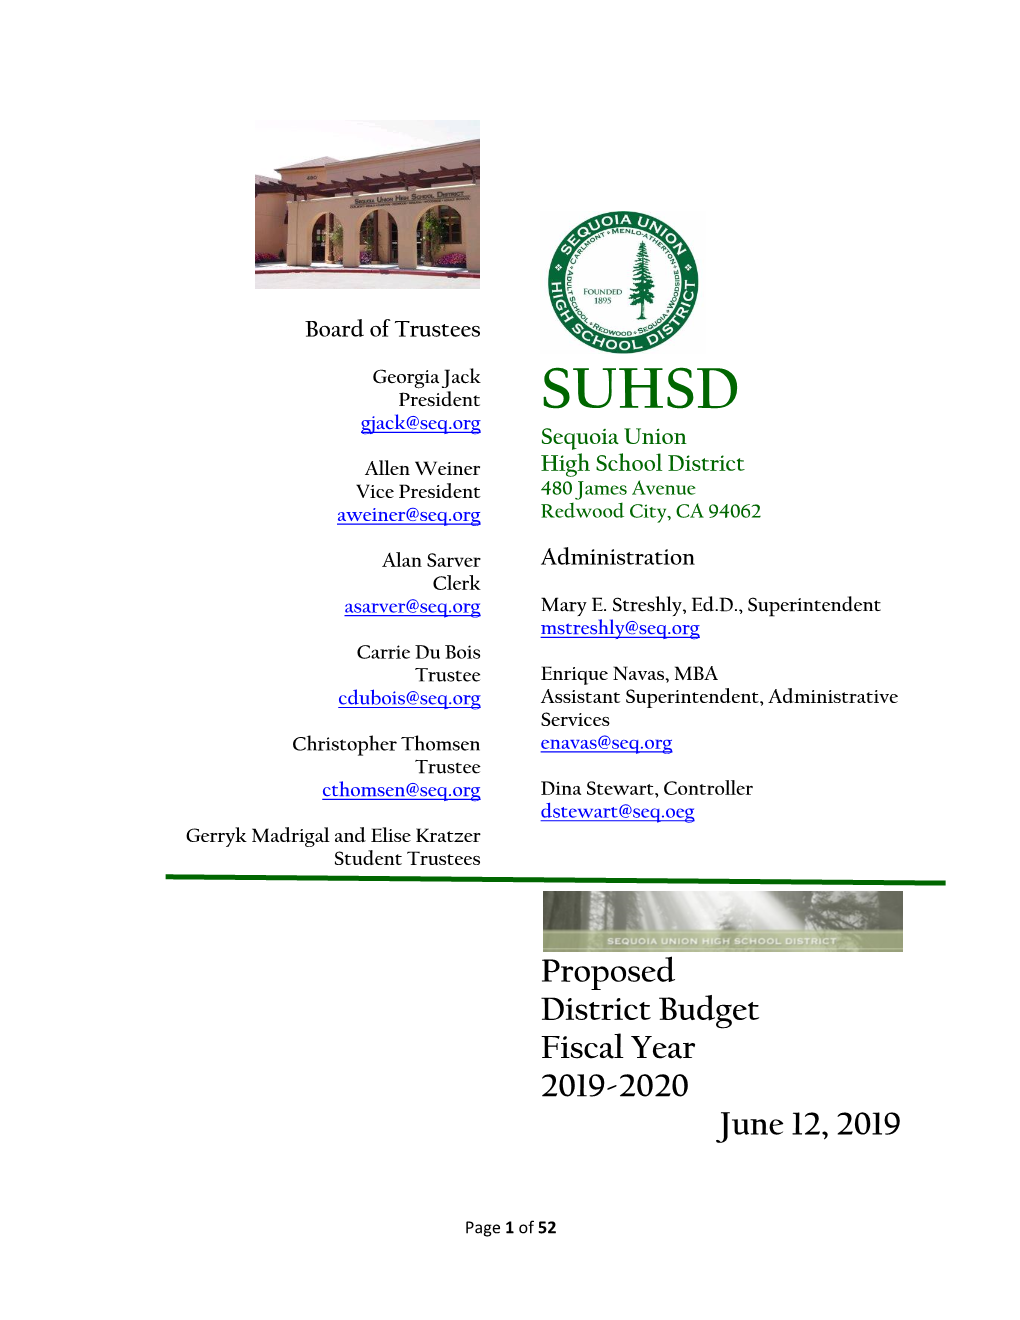 Proposed District Budget Fiscal Year 2019-2020 June 12, 2019